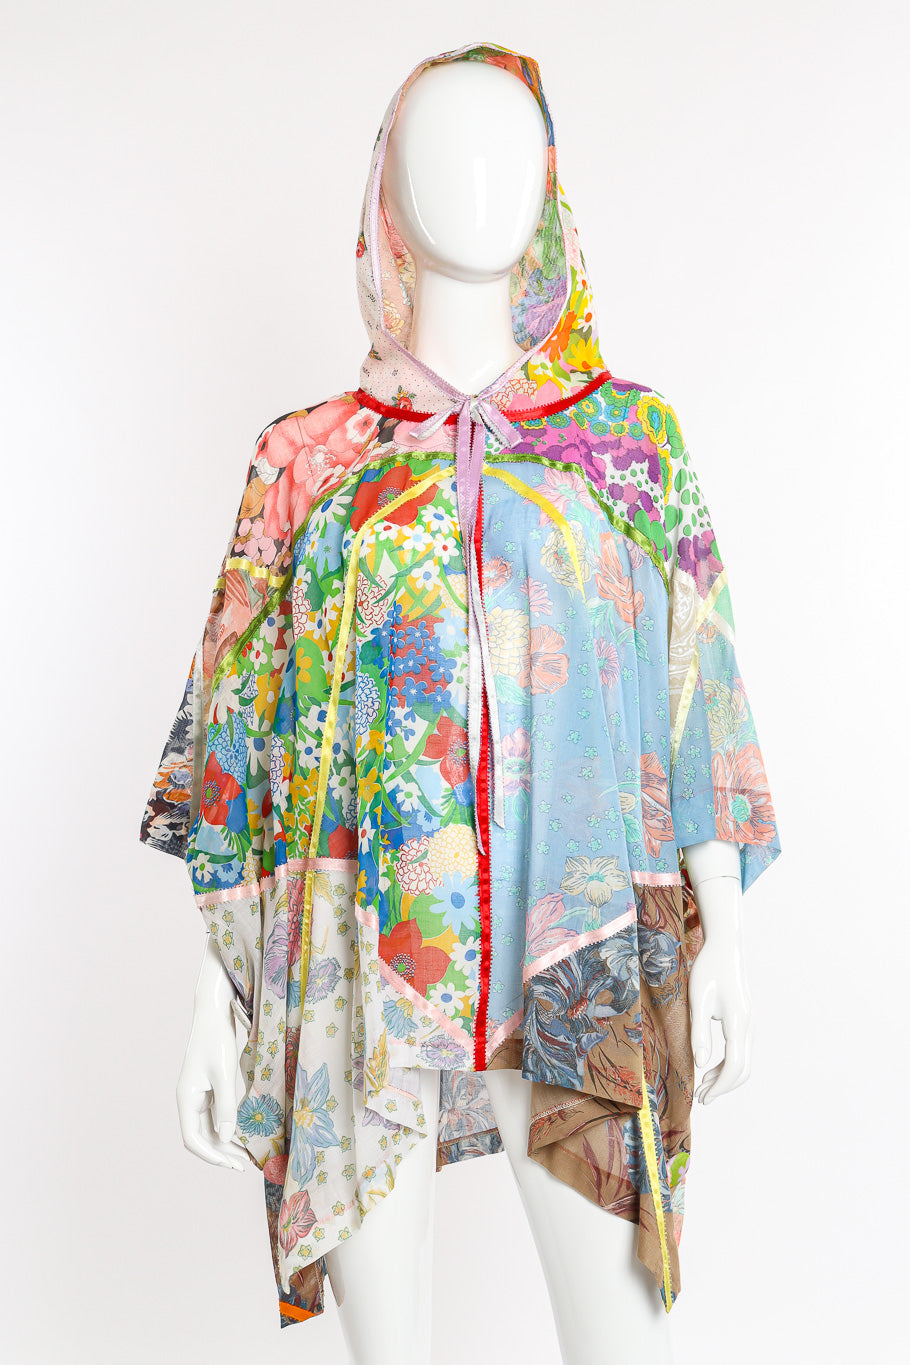 Vintage The French Clique Hooded Floral Patchwork Poncho II front view with hood up on mannequin @Recessla